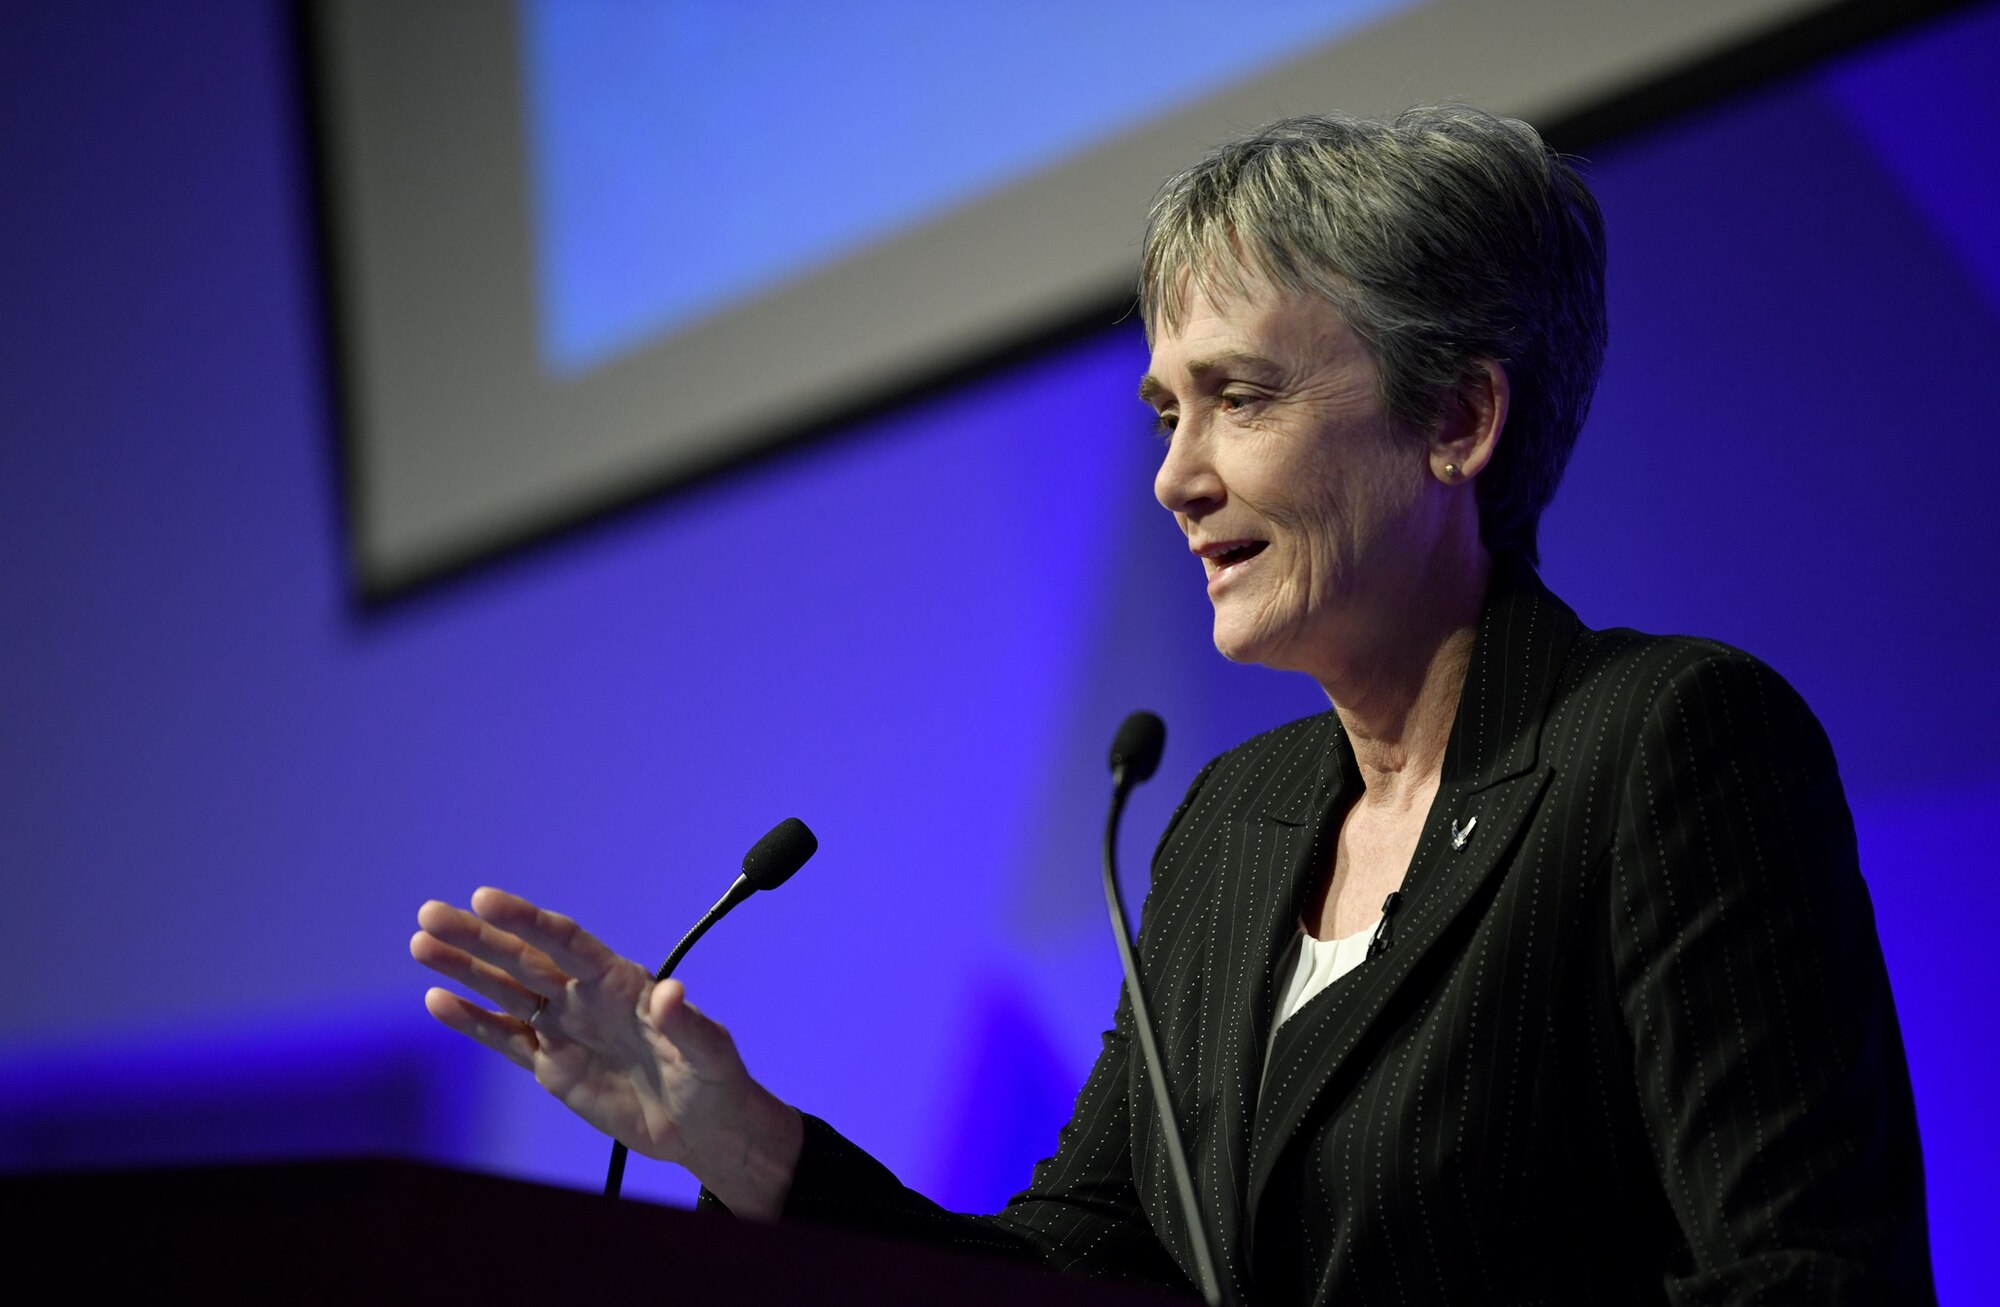 Secretary of the Air Force Heather Wilson speaks to the audience at the National Academy of Sciences, Washington, D.C., Jan. 18, 2018.  Wilson highlighted the importance of working with universities and private industry to advance tomorrow’s Air Force. (U.S. Air Force photo by Wayne A. Clark)